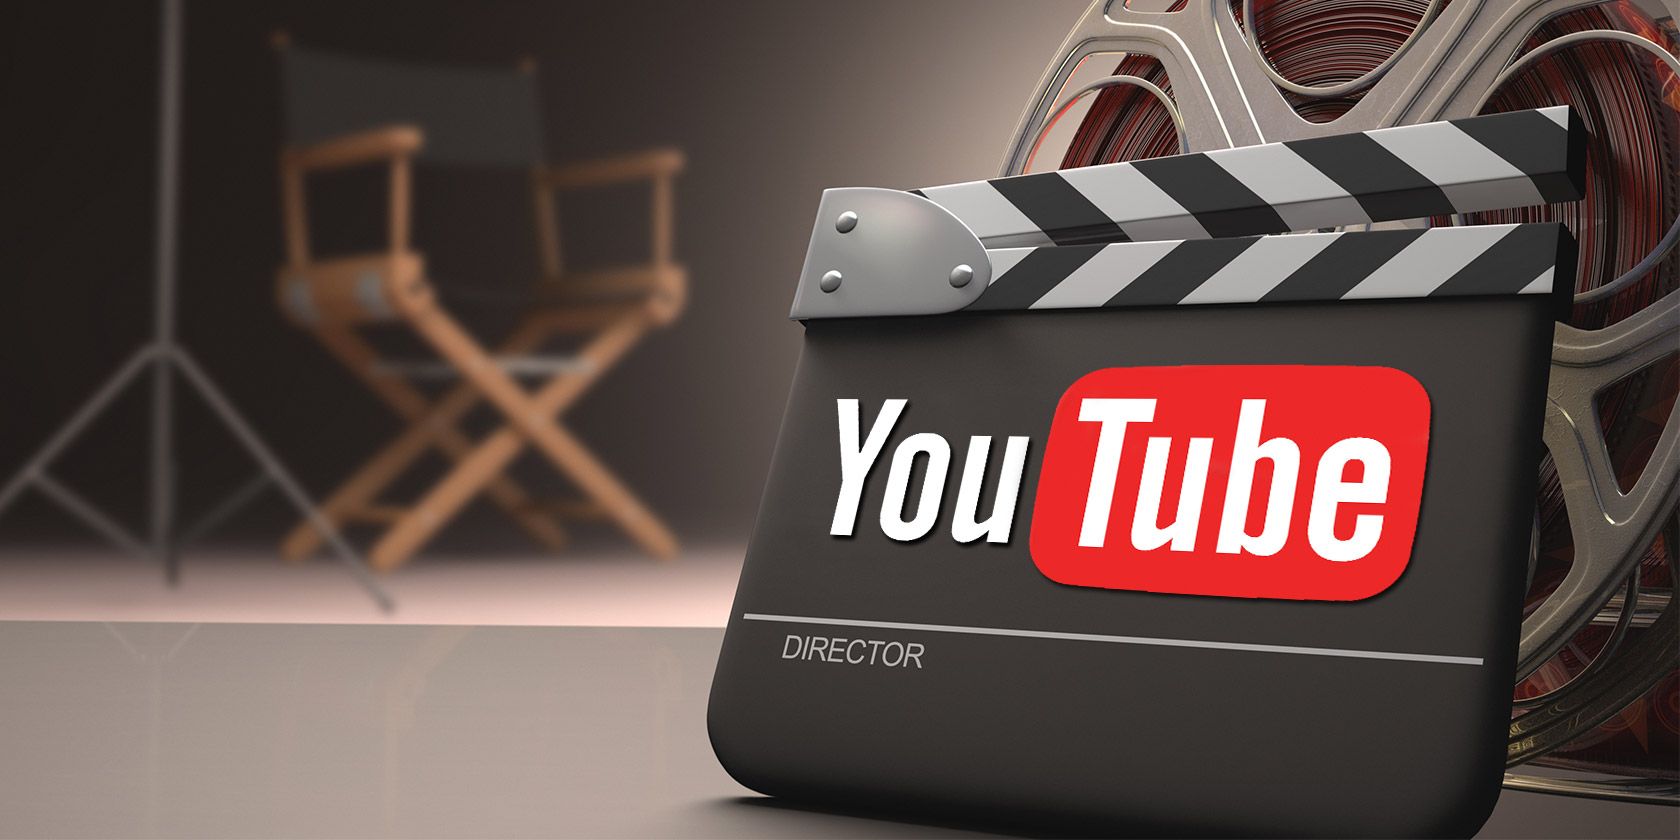 Love Movies? 4 Awesome YouTube Channels You Need to Watch